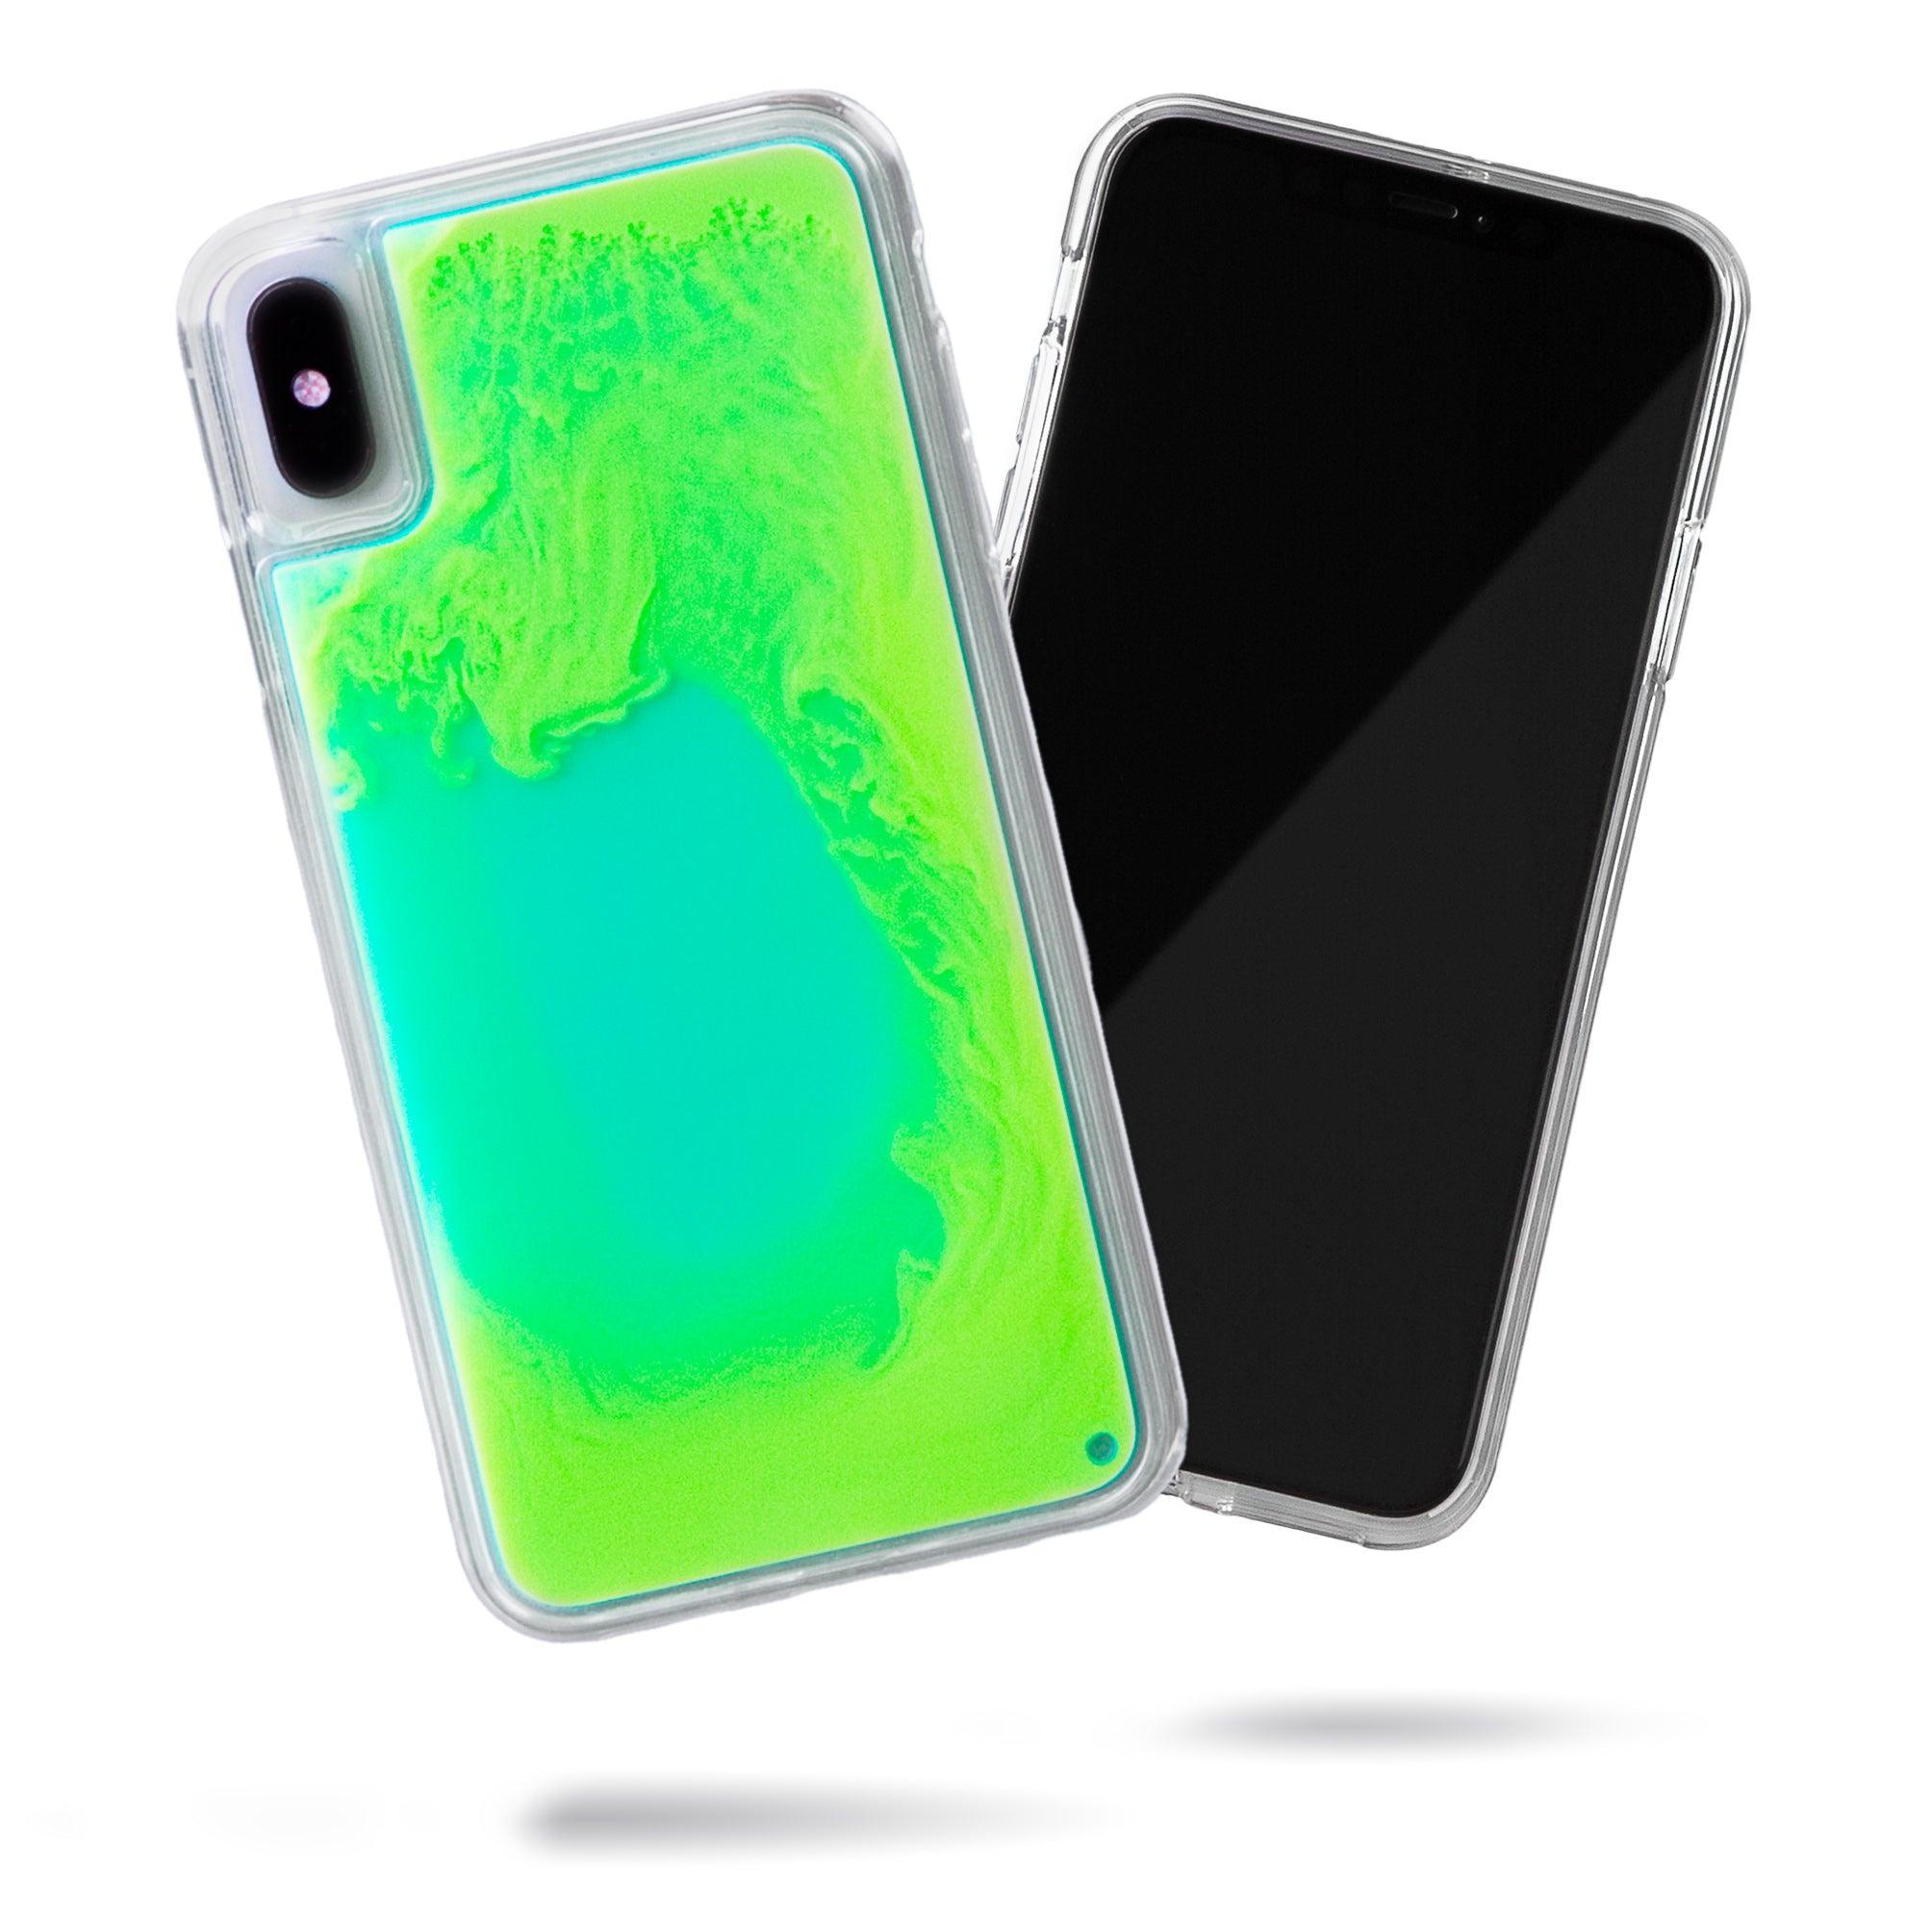 Neon Sand iPhone Xs Max Case - Mint and Neon Green Glow